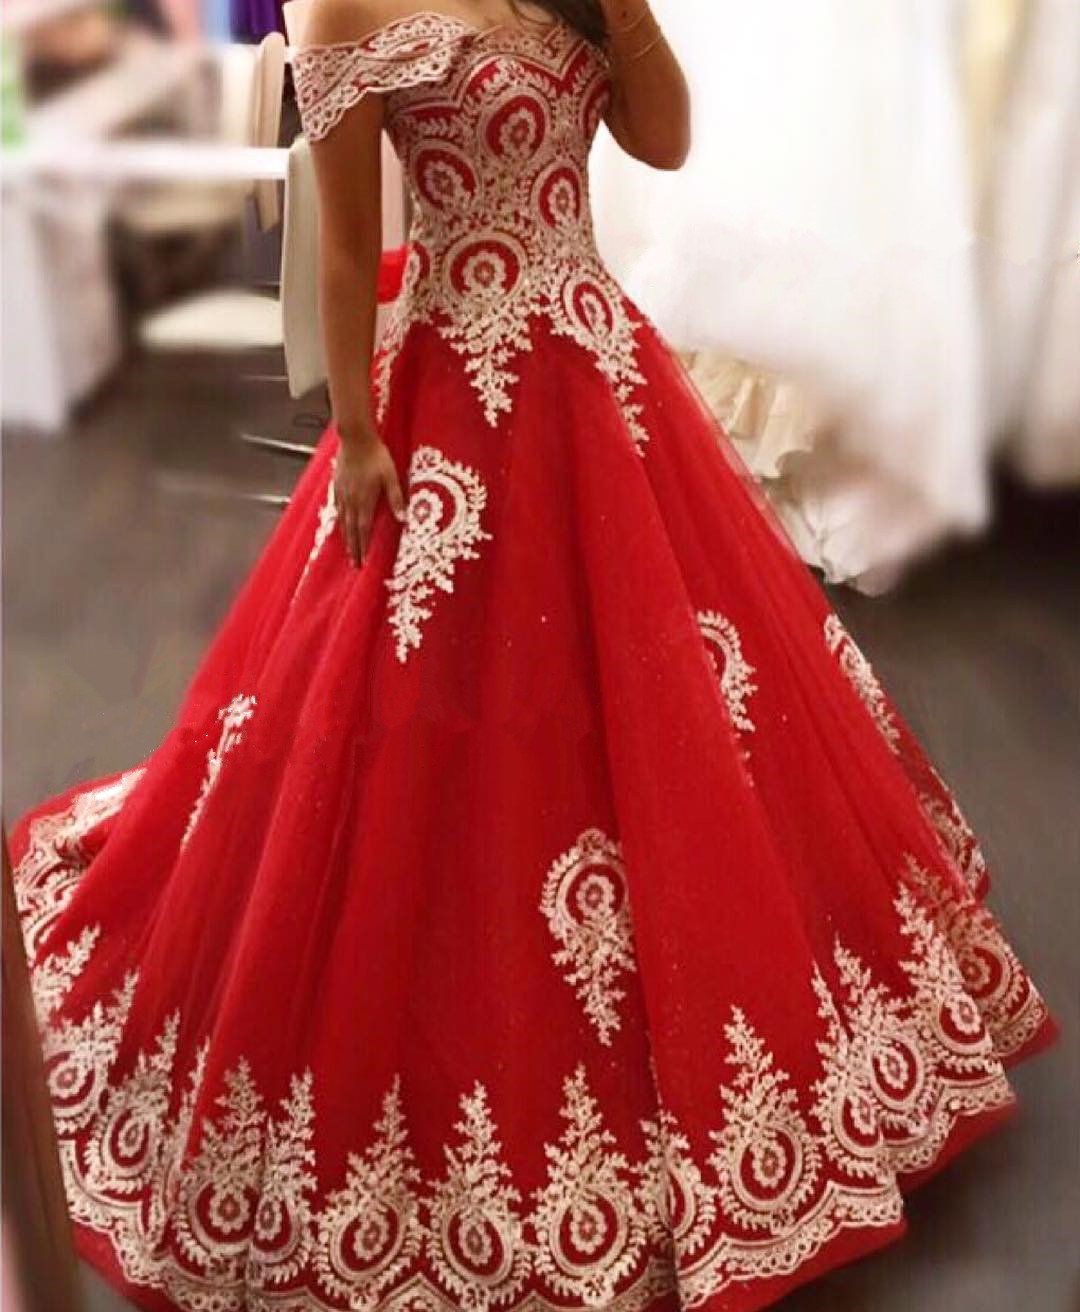 Gold Lace Appliques Prom Dress,red Evening Gowns,elegant Bride Dress,prom Dress 2017,wedding Dress 2017